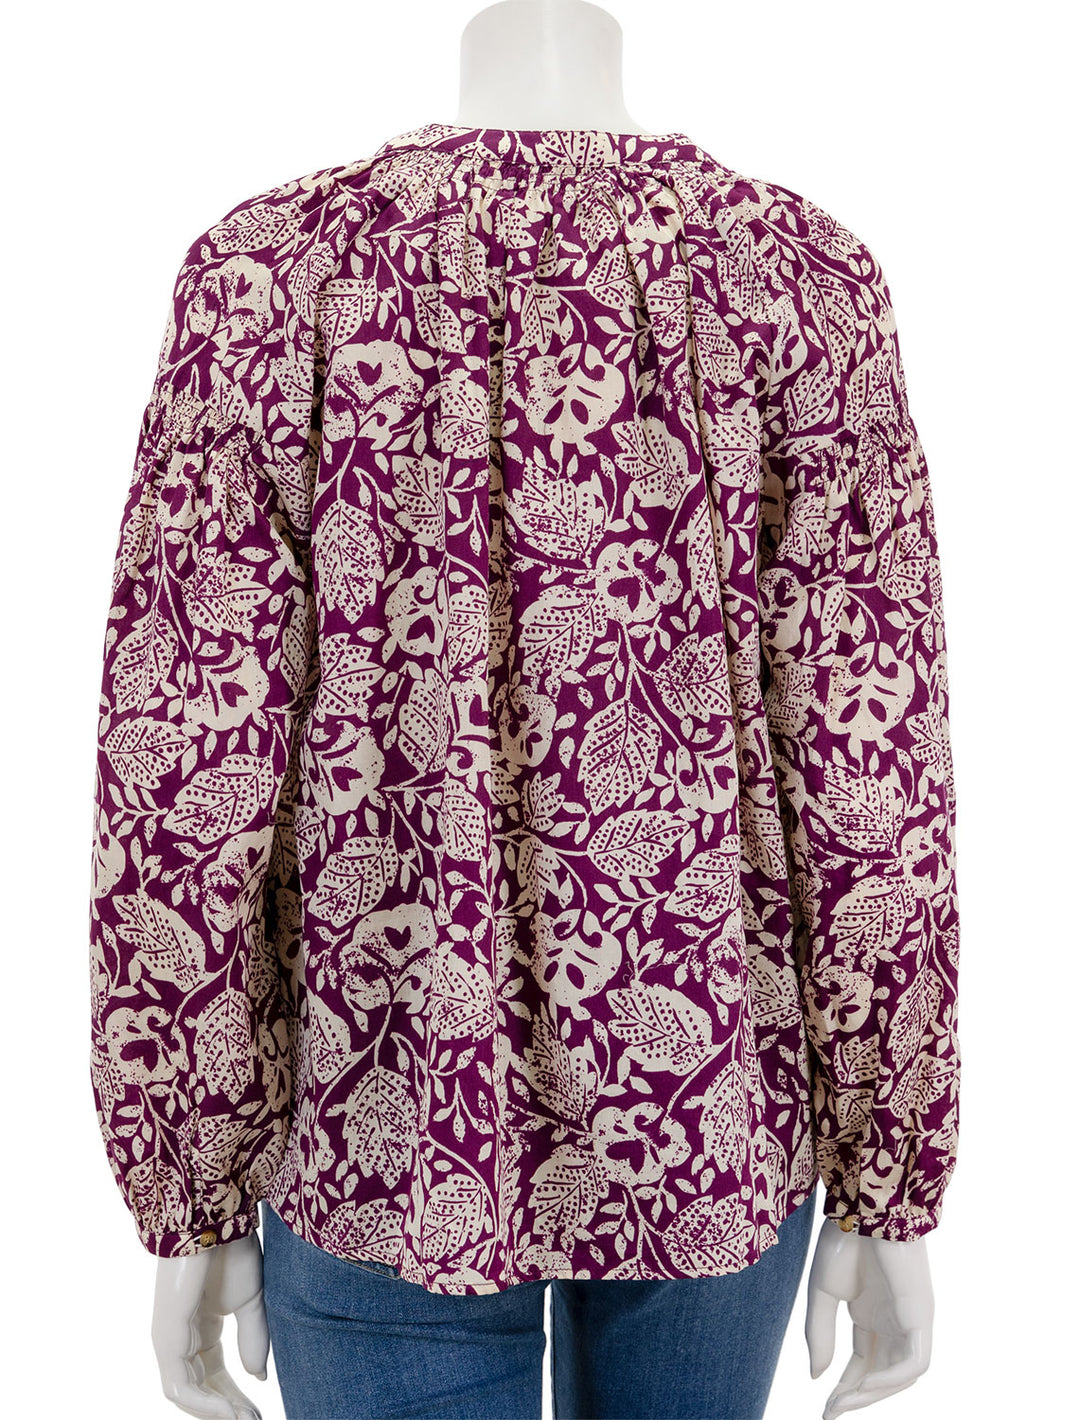 Back view of Vanessa Bruno's nipoa top in plum floral.